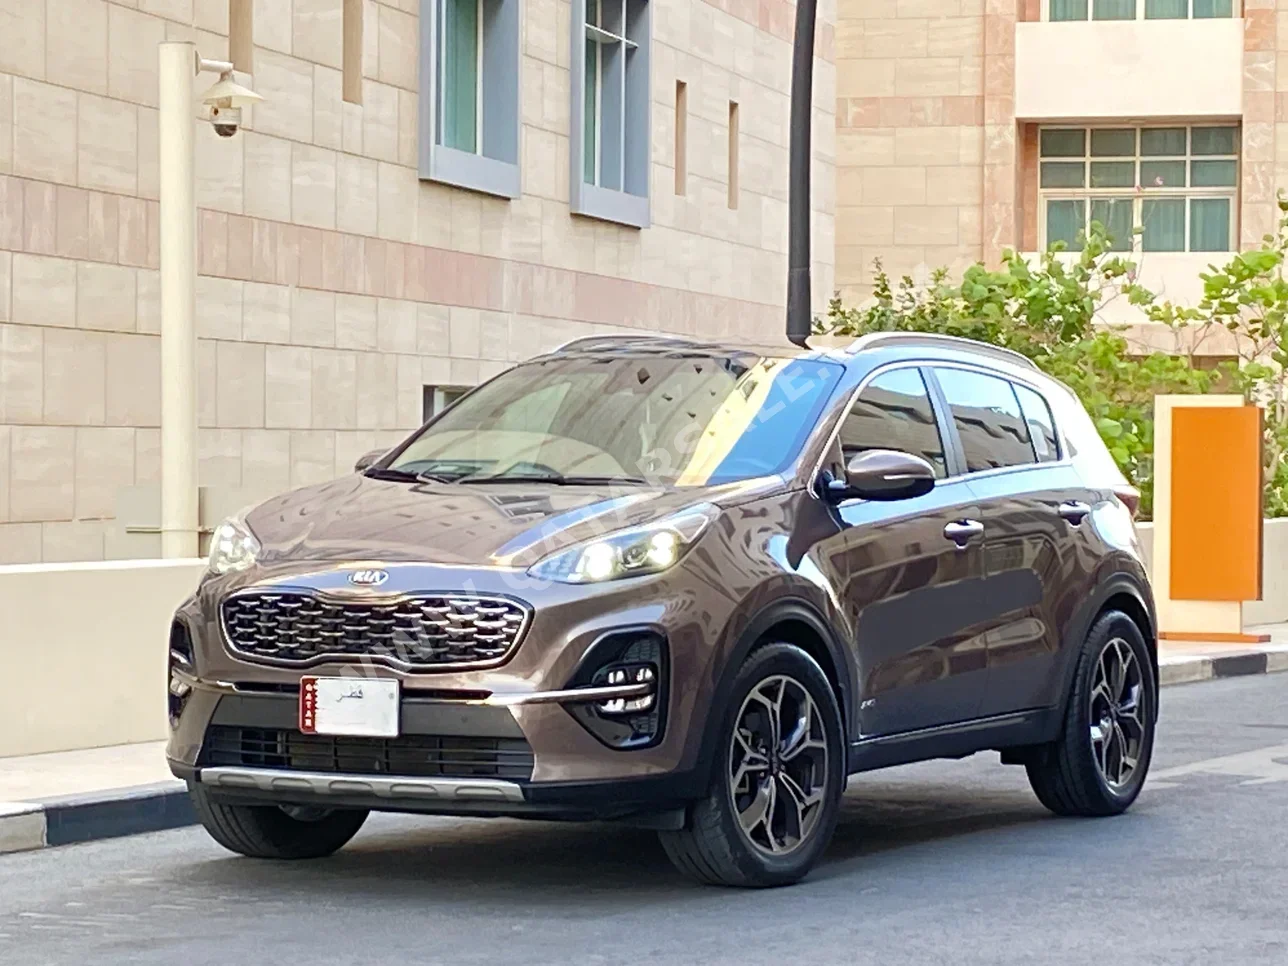 Kia  Sportage  GT  2021  Automatic  67,000 Km  4 Cylinder  Front Wheel Drive (FWD)  SUV  Brown  With Warranty